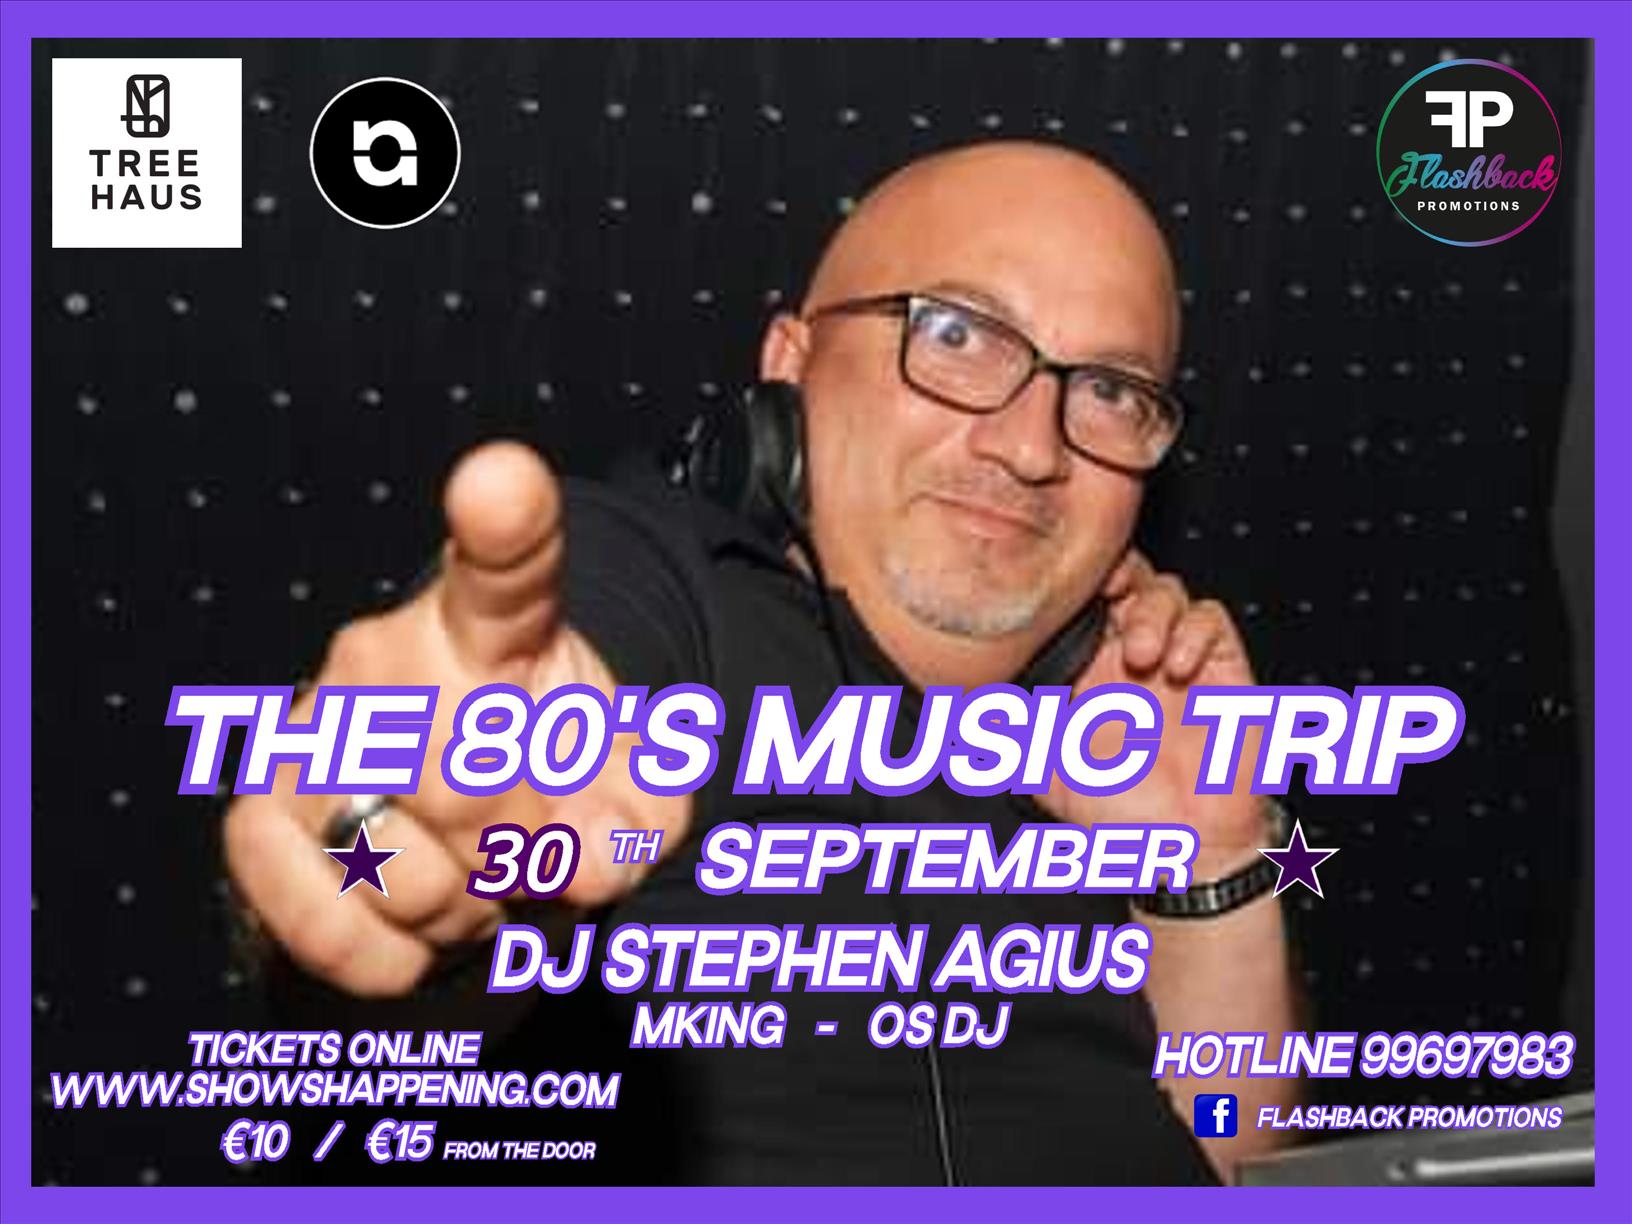 The 80s Music Trip poster